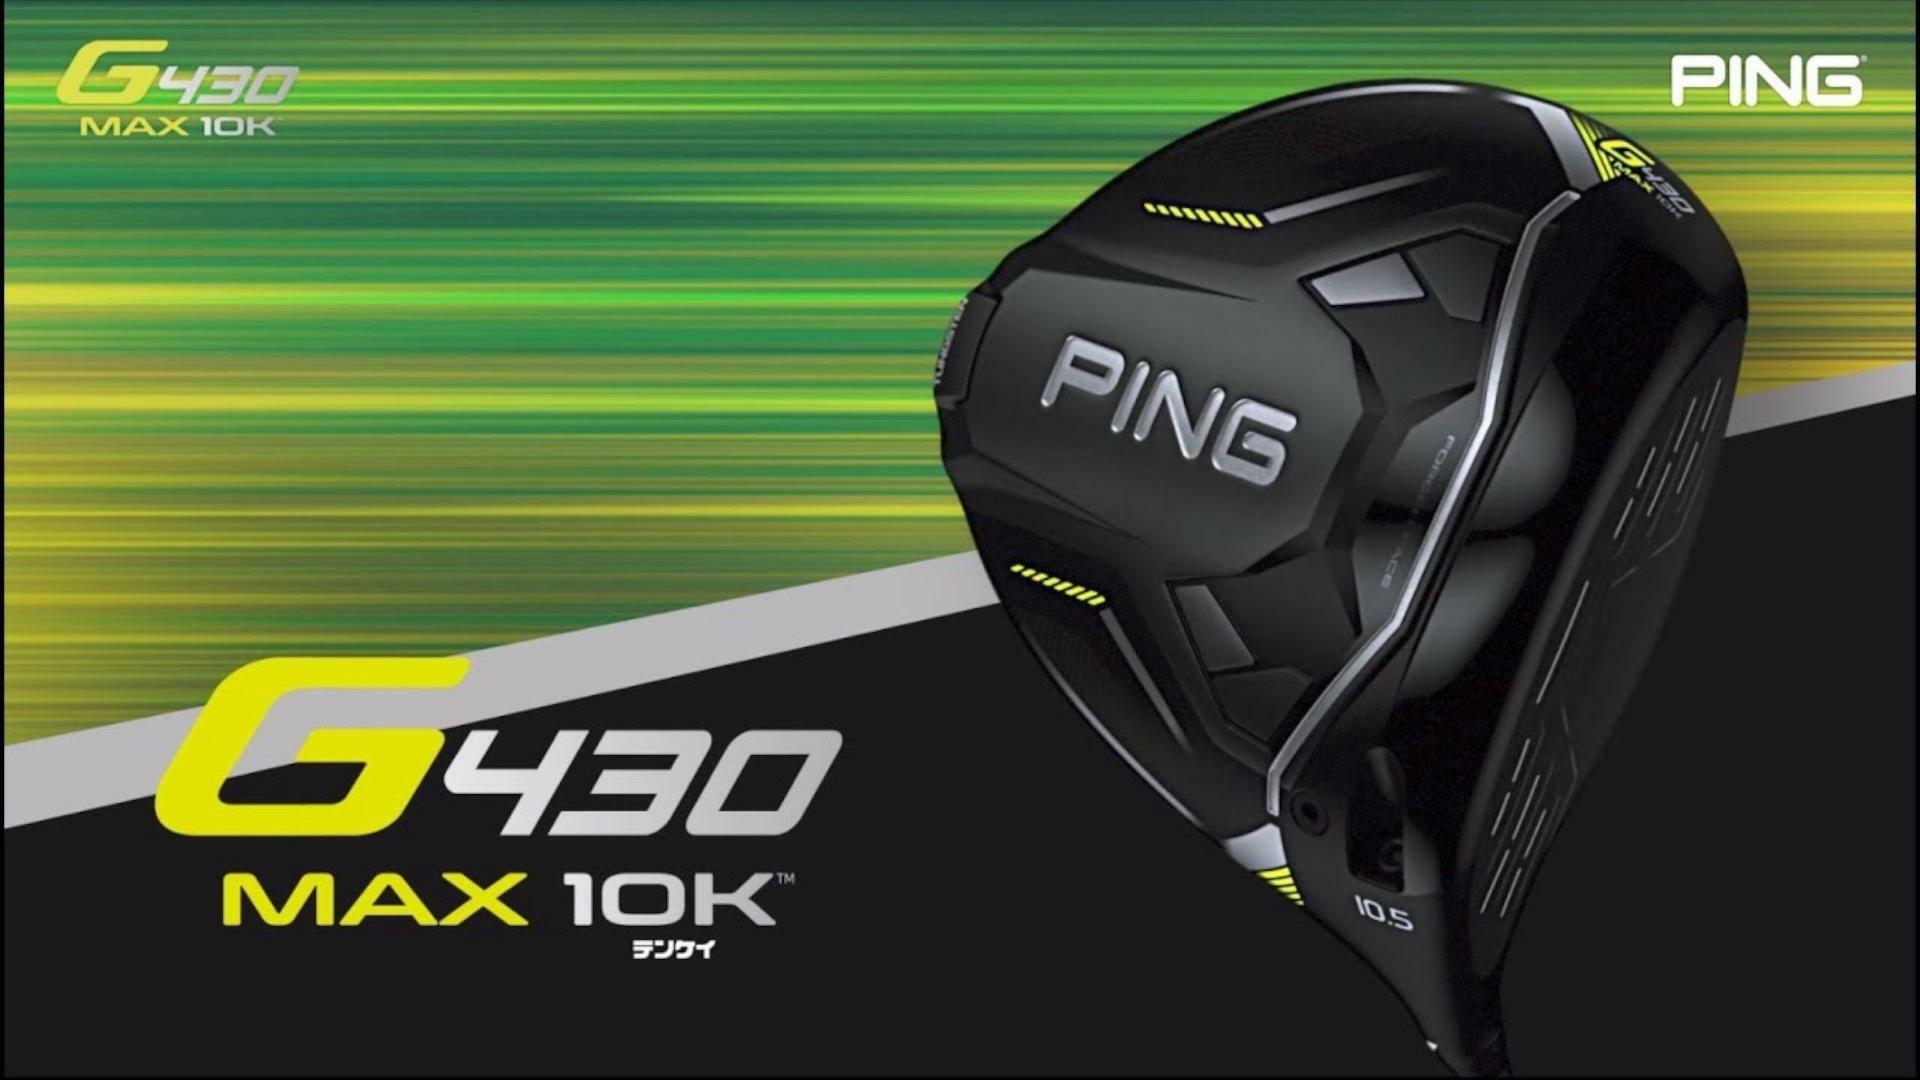 PING / G430 MAX 10Kドライバー (PING公式HPより引用：https://clubping.jp/product/product2024_g430max10k.html)